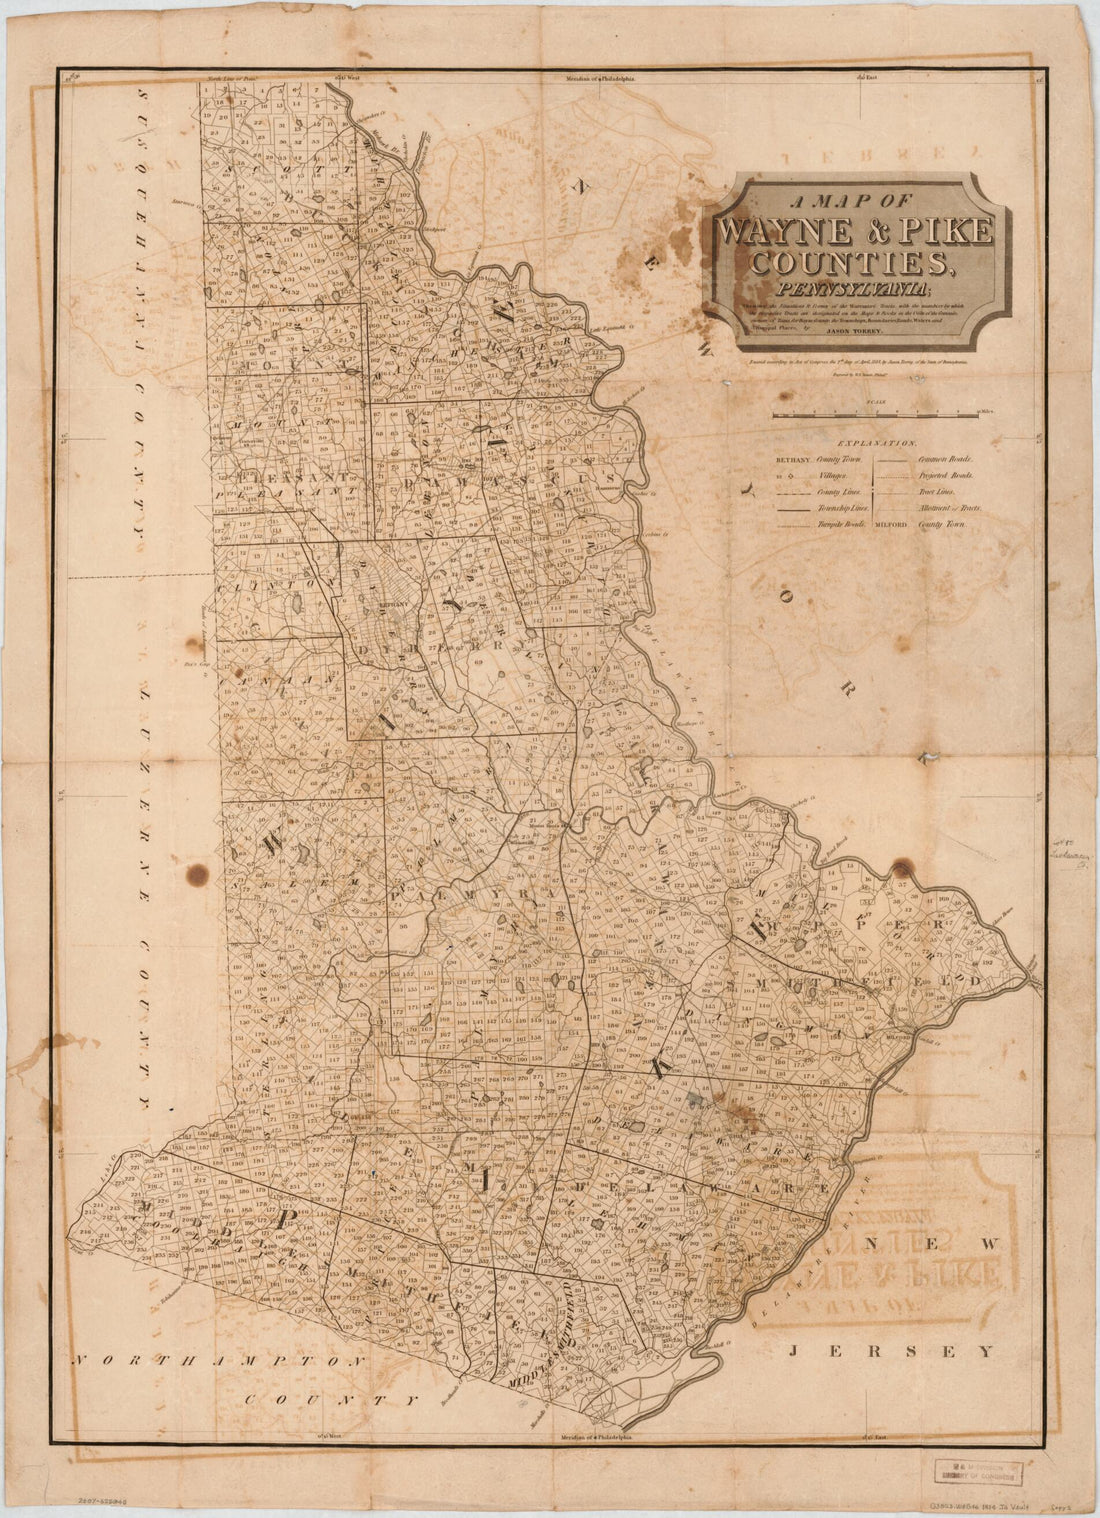 This old map of A Map of Wayne &amp; Pike Counties, Pennsylvania : Shewing the Situations &amp; Forms of the Warrantee Tracts, With the Numbers by Which the Respective Tracts Are Distinguished In the Maps &amp; Books In the Office of the Commissioners of Places for 